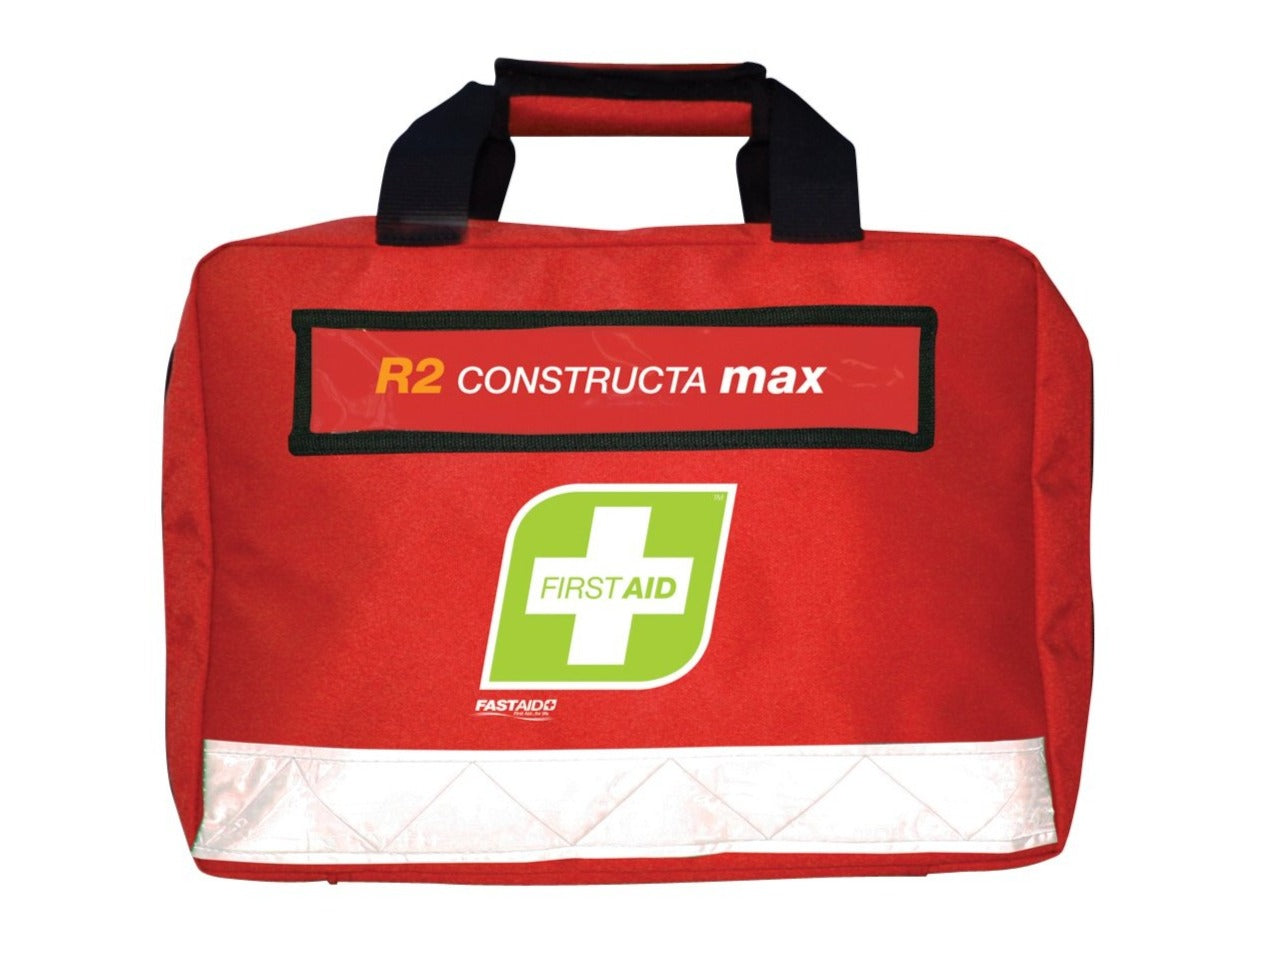 Fastaid First Aid Kit R2 Constructa max Kit Soft Pack FAR2C30 - #1 Workwear  Store